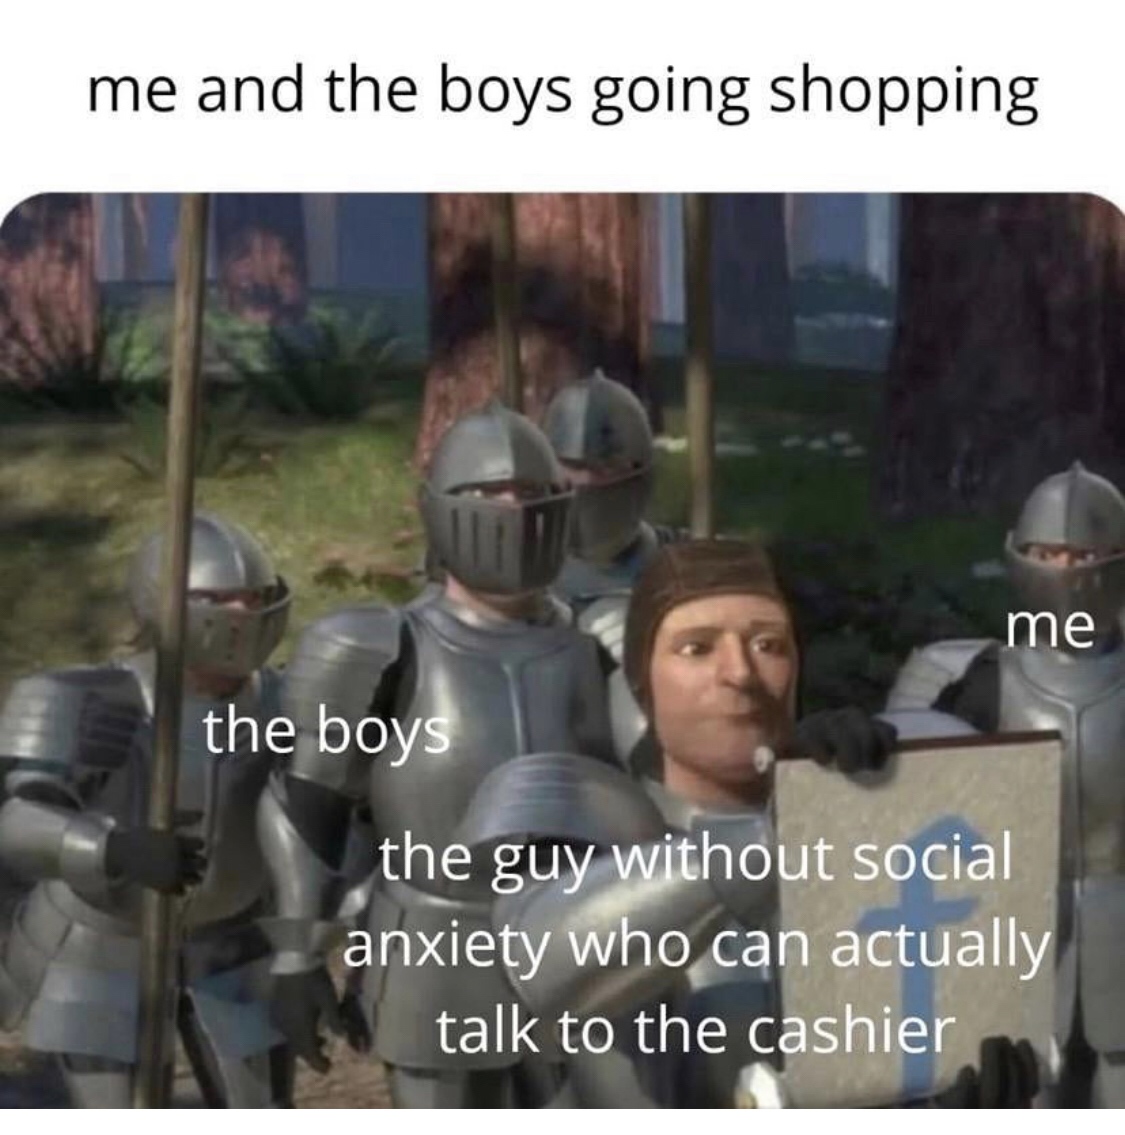 Humour - me and the boys going shopping me the boys the guy without social anxiety who can actually talk to the cashier